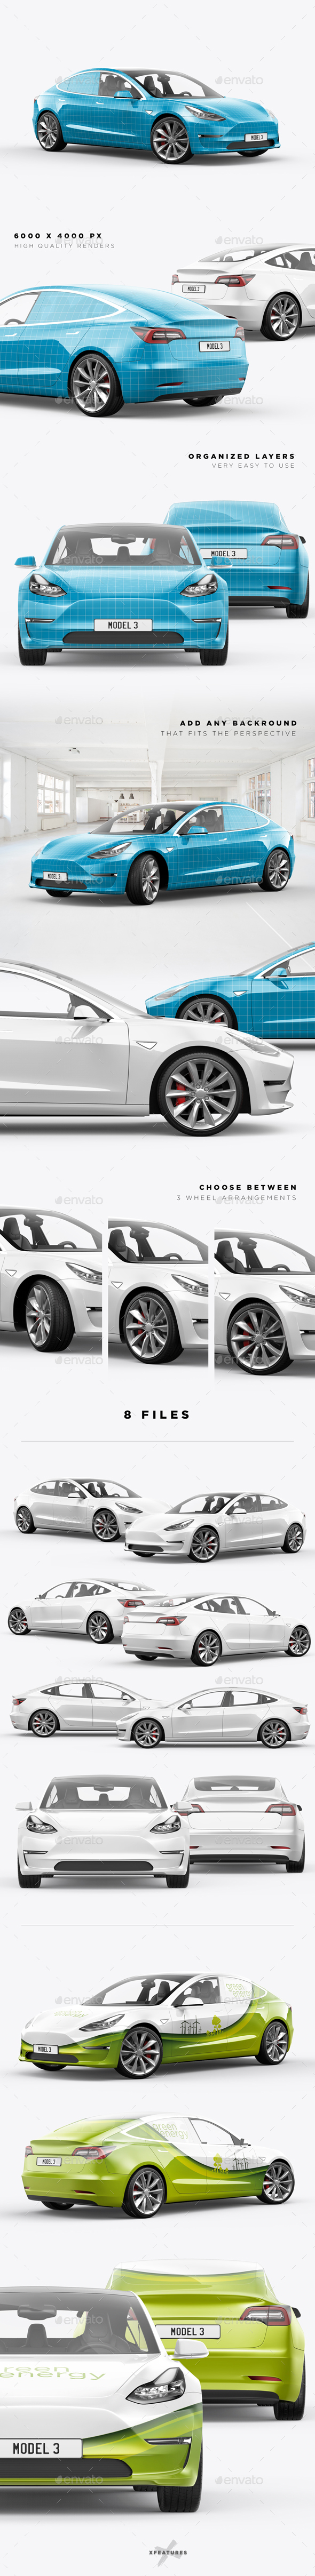 Download Model 3 Electric Car Mockup By Xfeatures Graphicriver